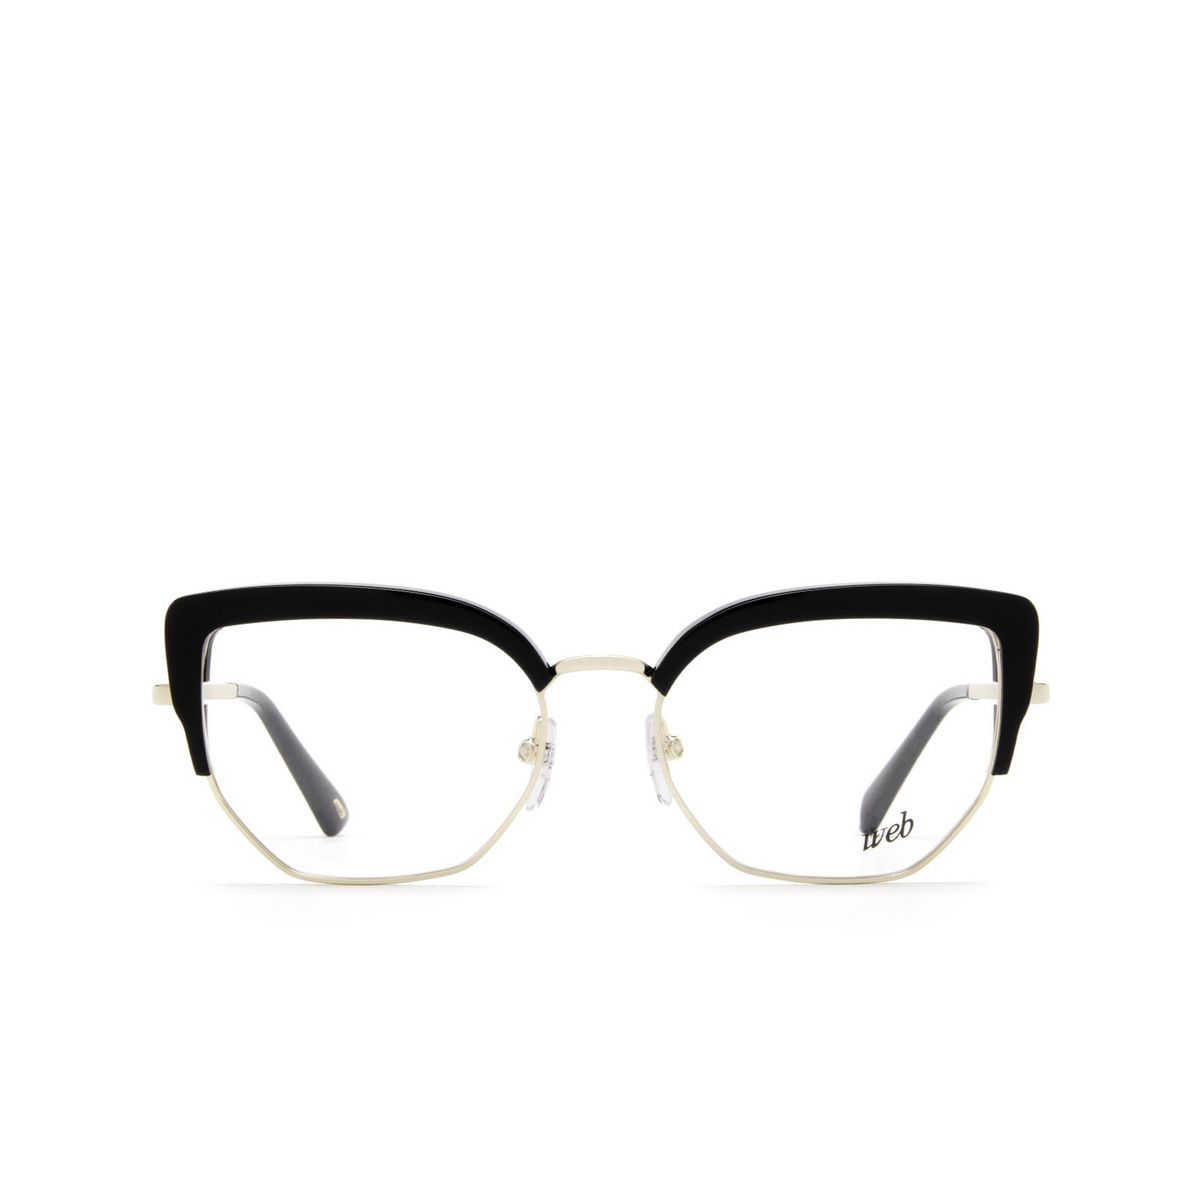 Web WE5370 Eyeglasses 32A Pale Gold - front view